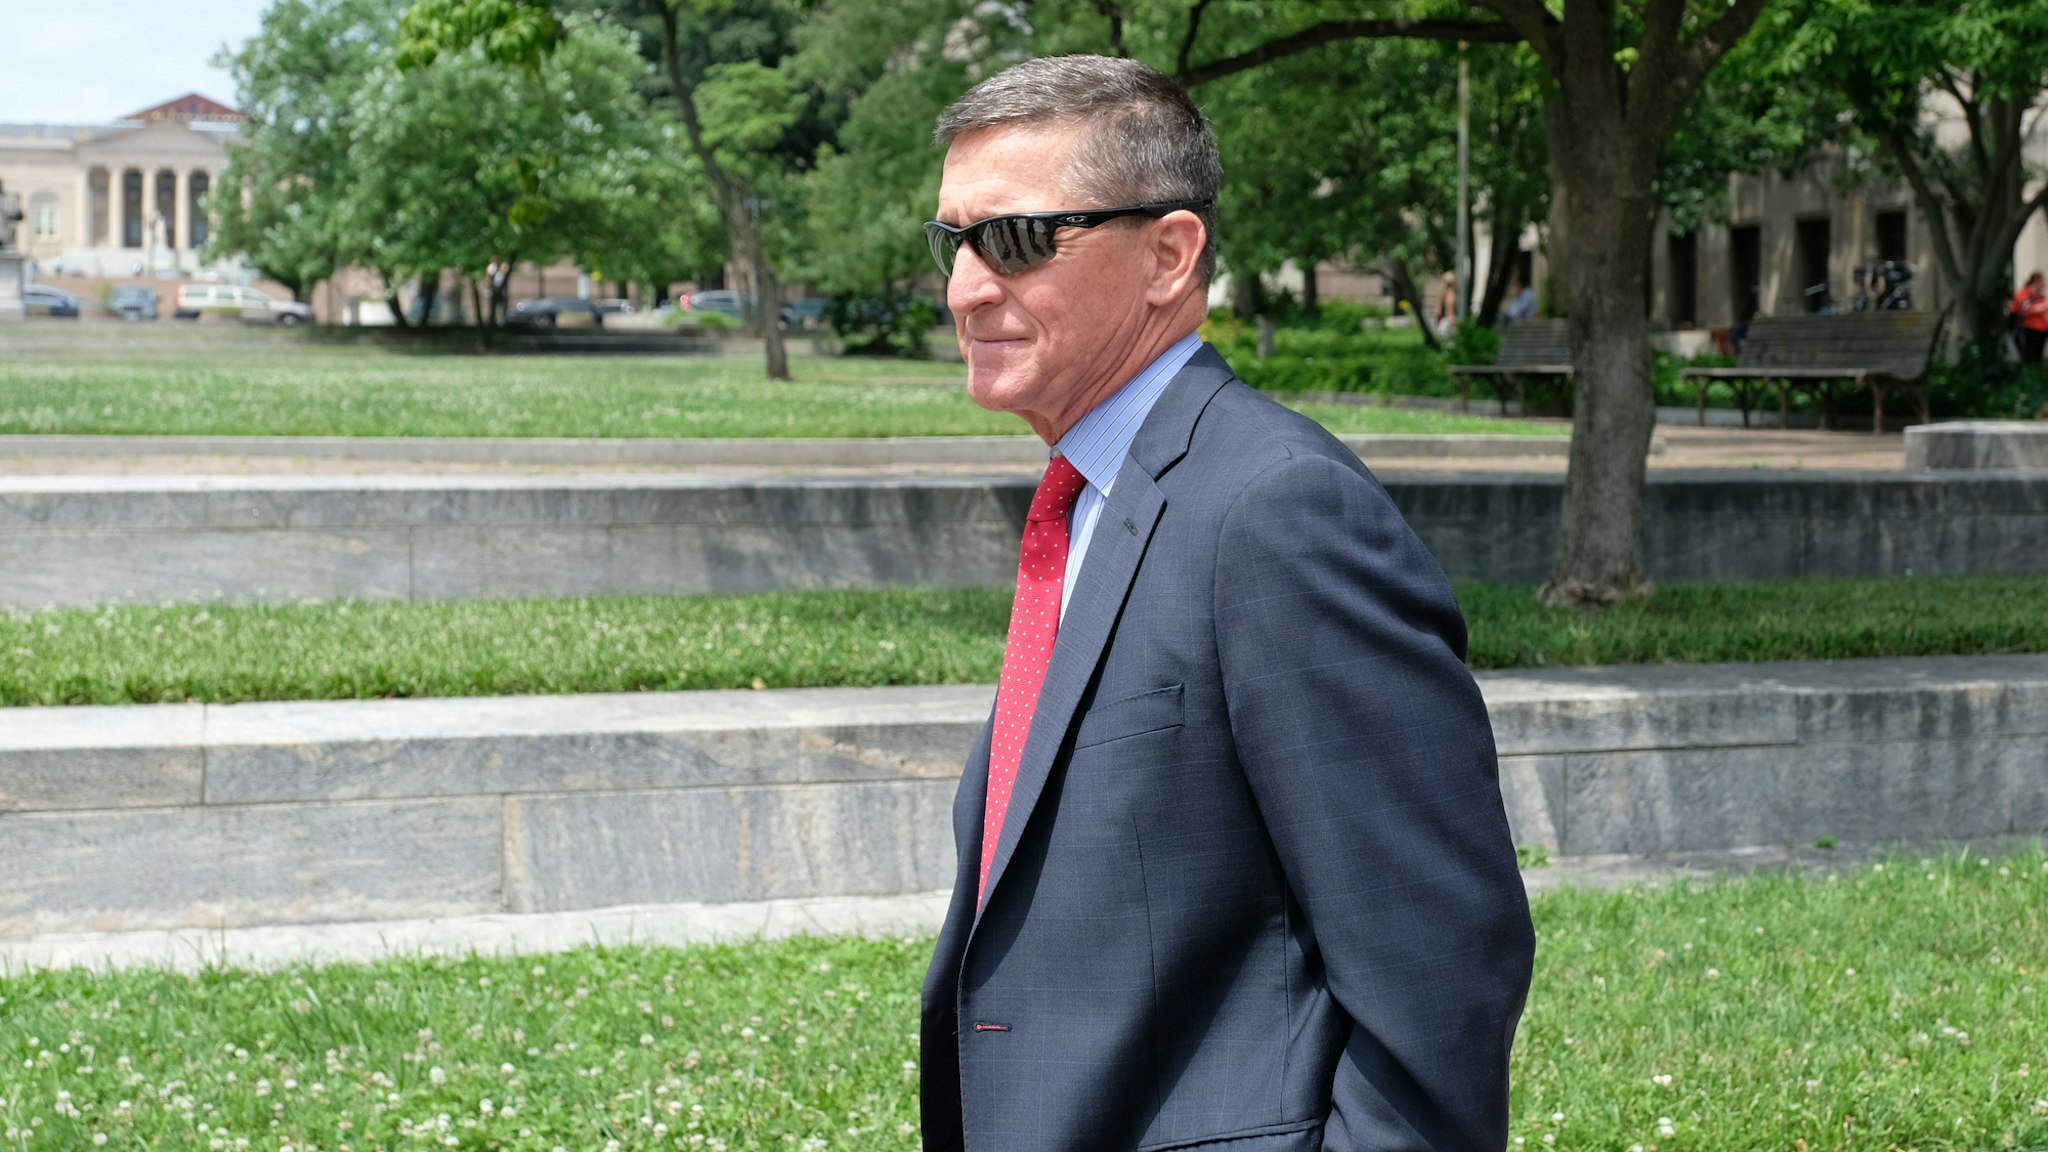 WASHINGTON, DC - JUNE 24: President Donald Trump’s former National Security Adviser Michael Flynn leaves the E. Barrett Prettyman U.S. Courthouse on June 24, 2019 in Washington, DC. criminal sentencing for Flynn will be on hold for at least another two months.